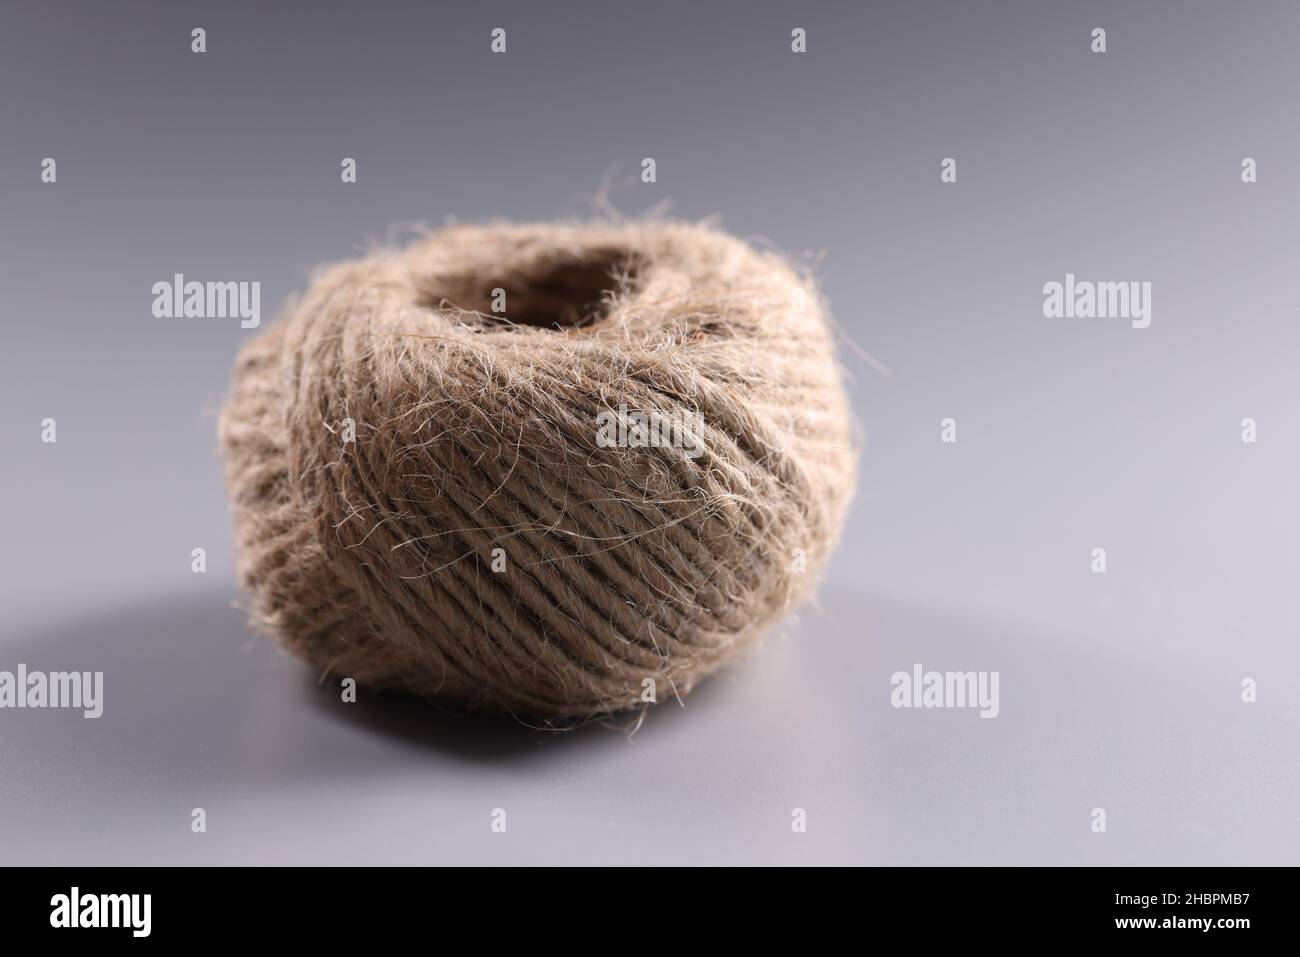 Rope Yarn Roller Isolated On White Stock Photo 1437429248